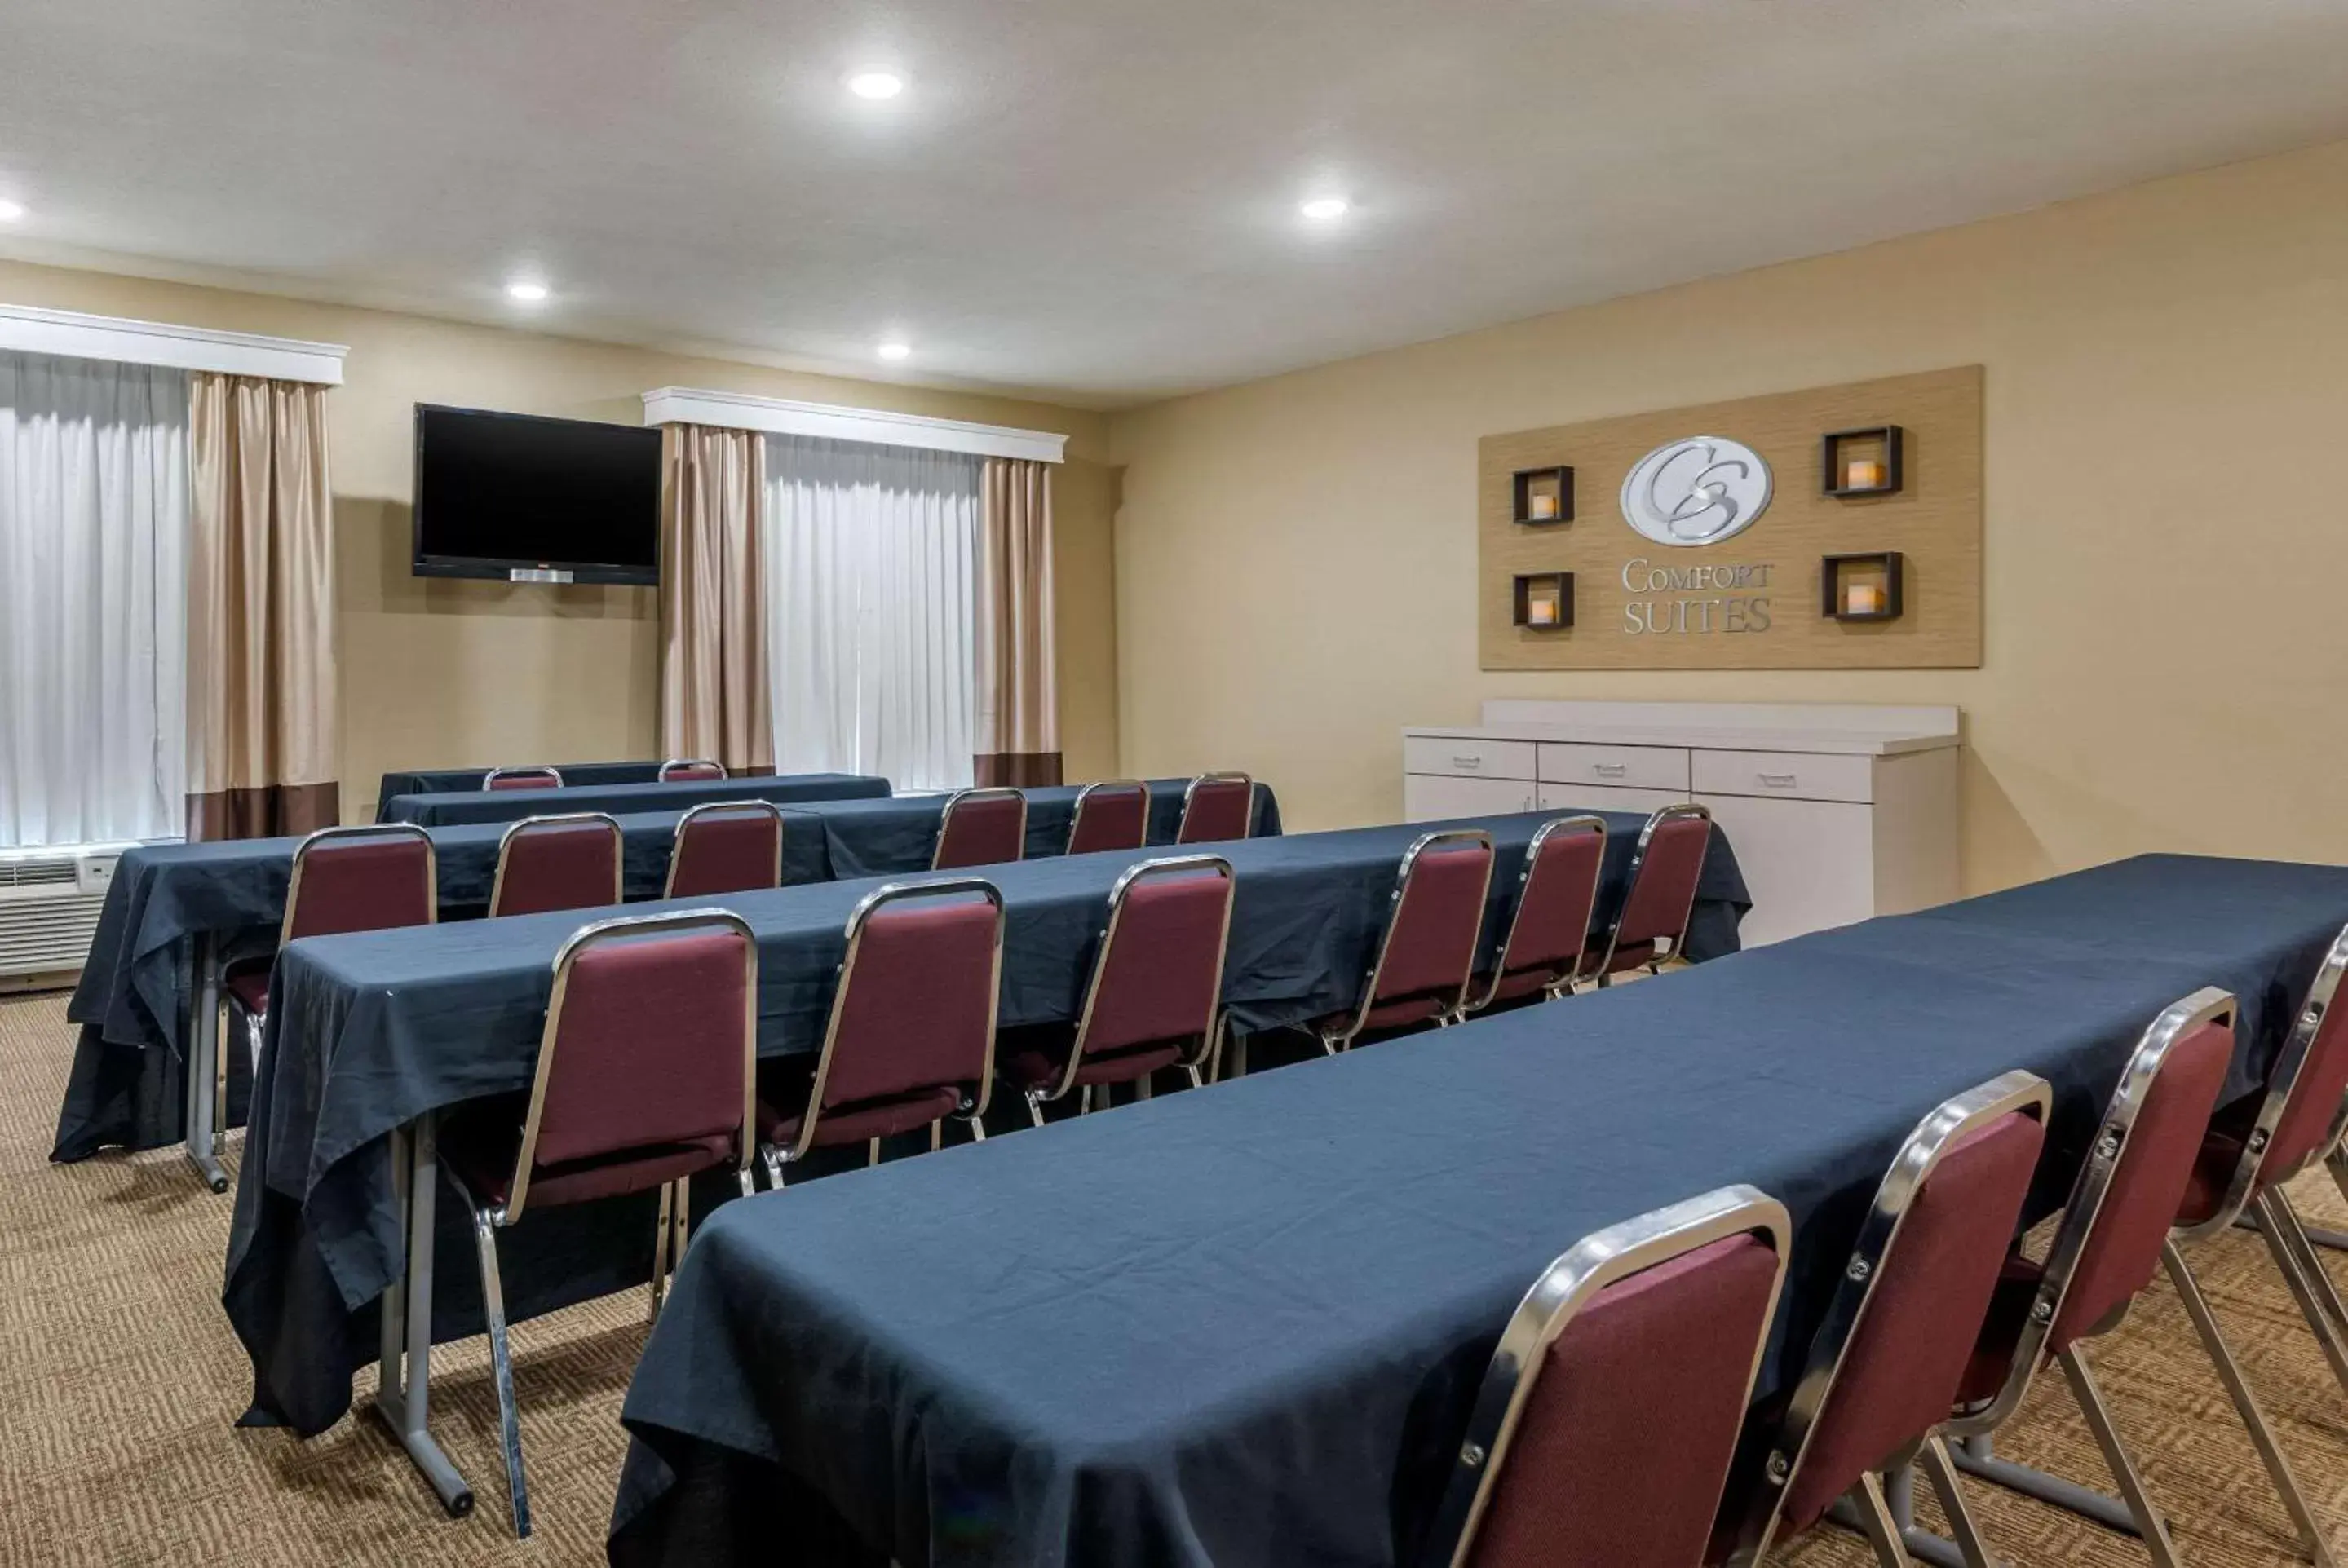 Meeting/conference room in Comfort Suites near Route 66